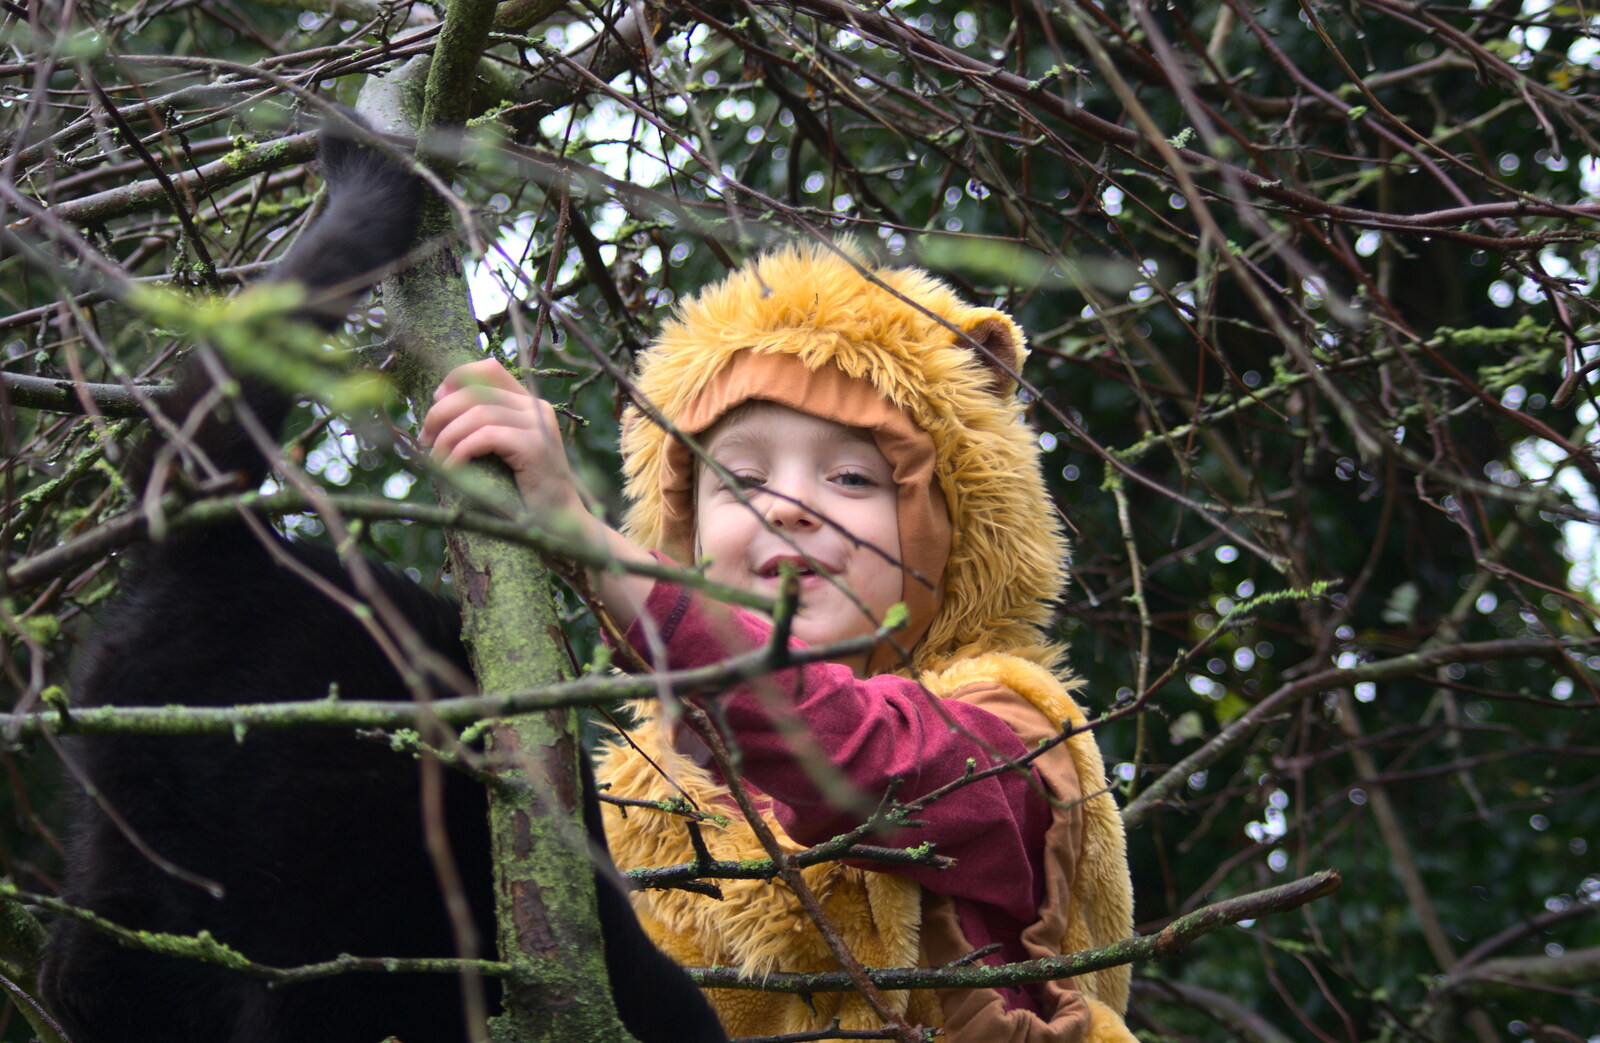 Fred up a tree in a lion costume from November Singing, Gislingham Primary School, Suffolk - 17th November 2014